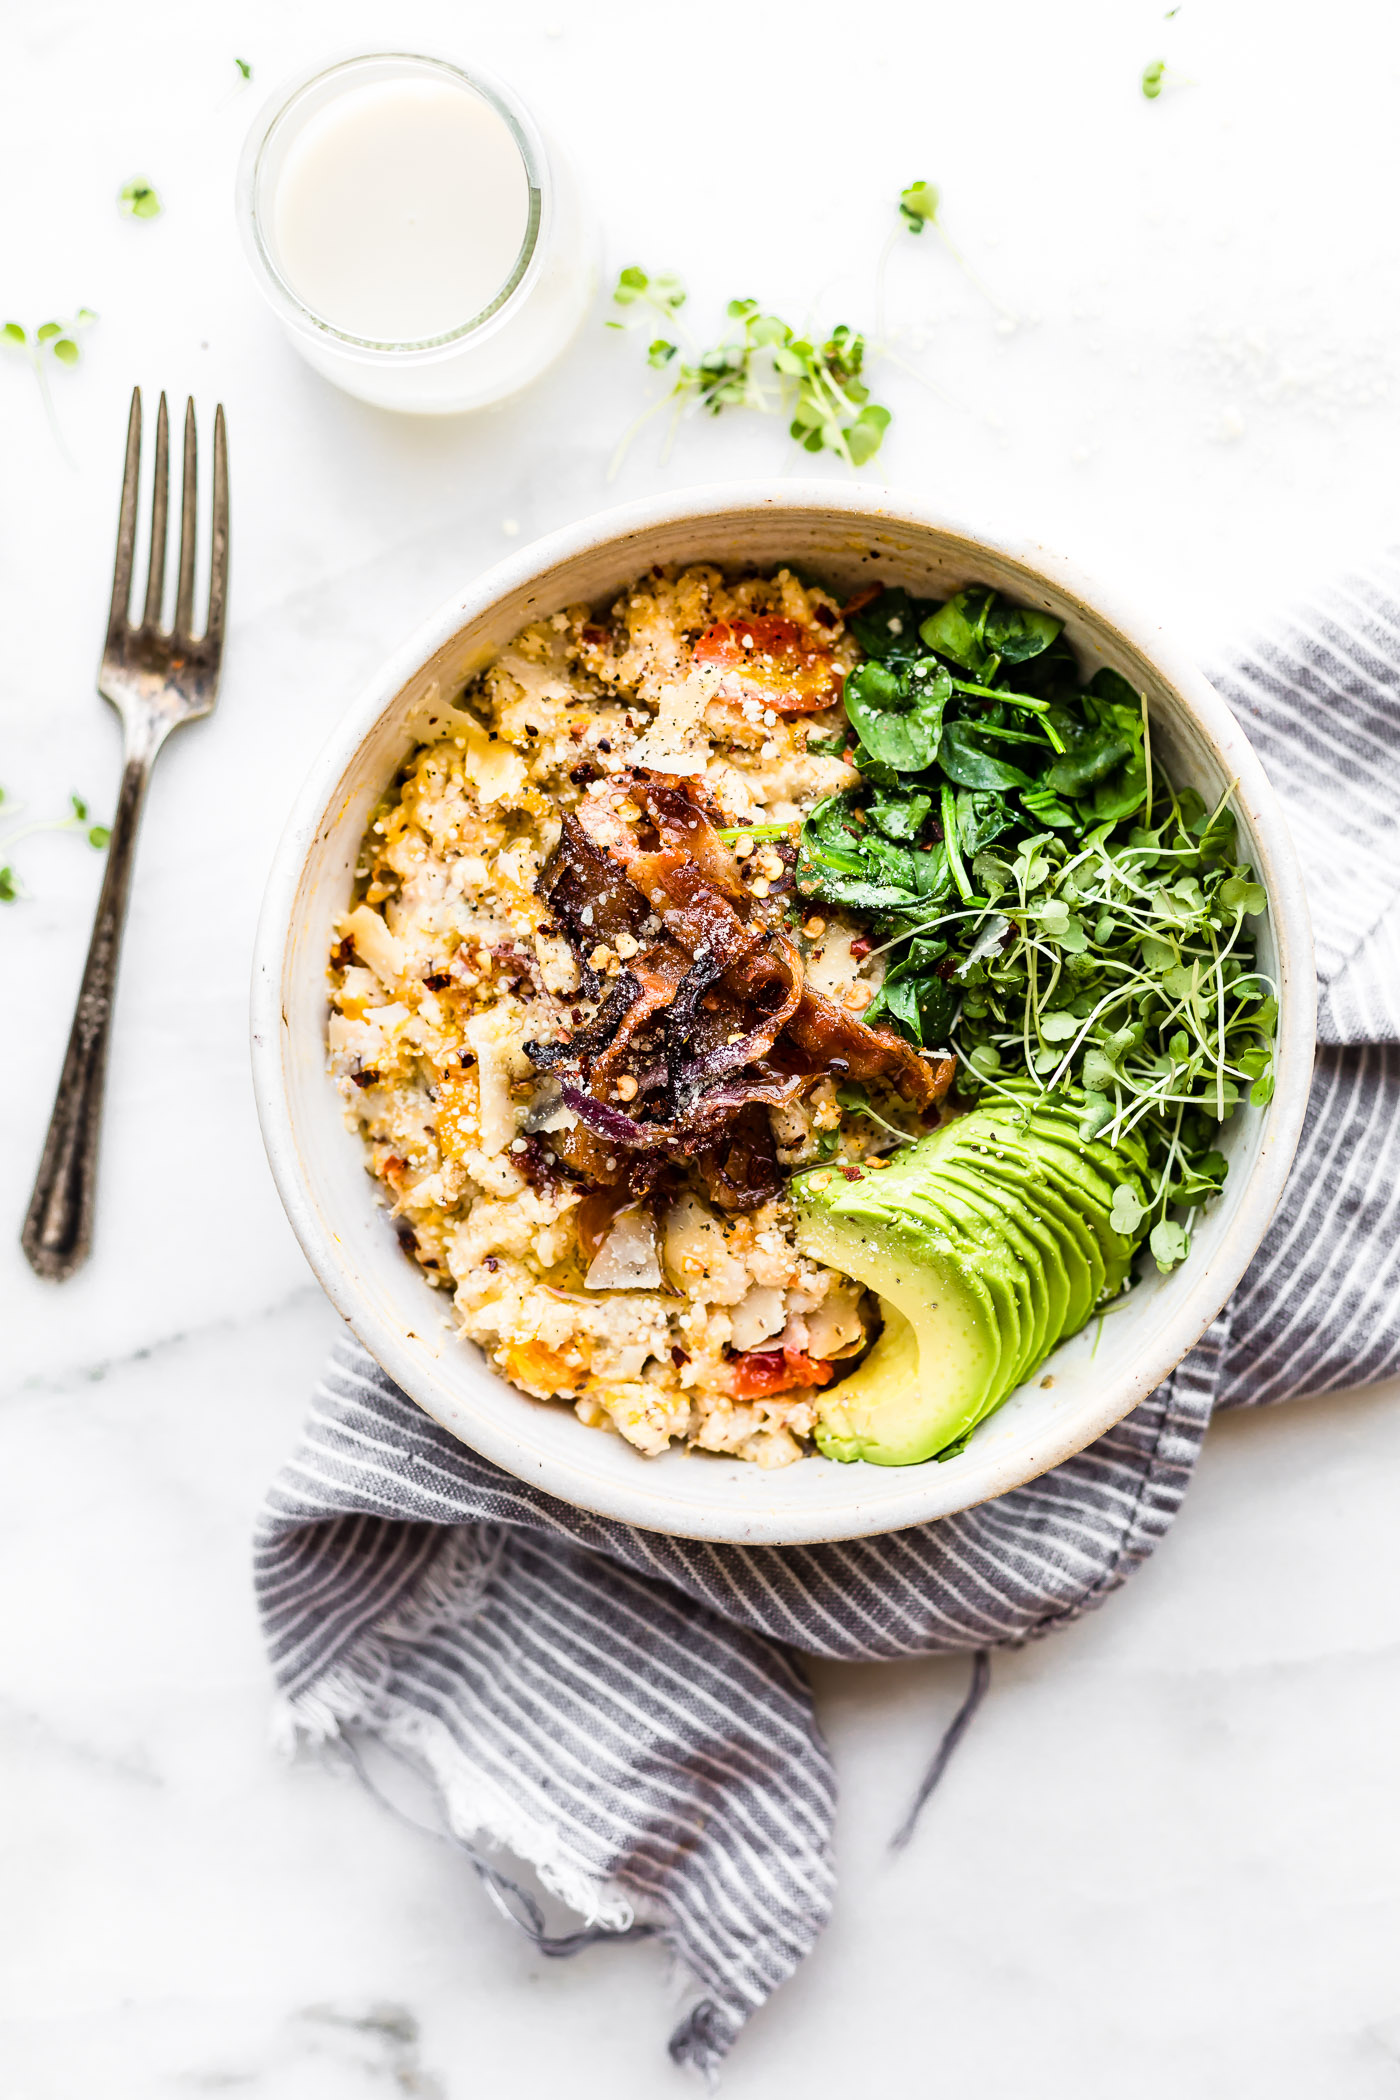 This Savory slow cooker oatmeal with crispy bacon will make you jump out of bed! A savory spin to your regular sweet oatmeal and total crowd pleaser dish, which is perfect for busy mornings! A Slow cooker oatmeal made with the addition butternut squash, garlic, herbs, parmesan cheese, and topped with crispy bacon and avocado. An easy to make well-rounded healthy meal for any time of day. Dairy free option